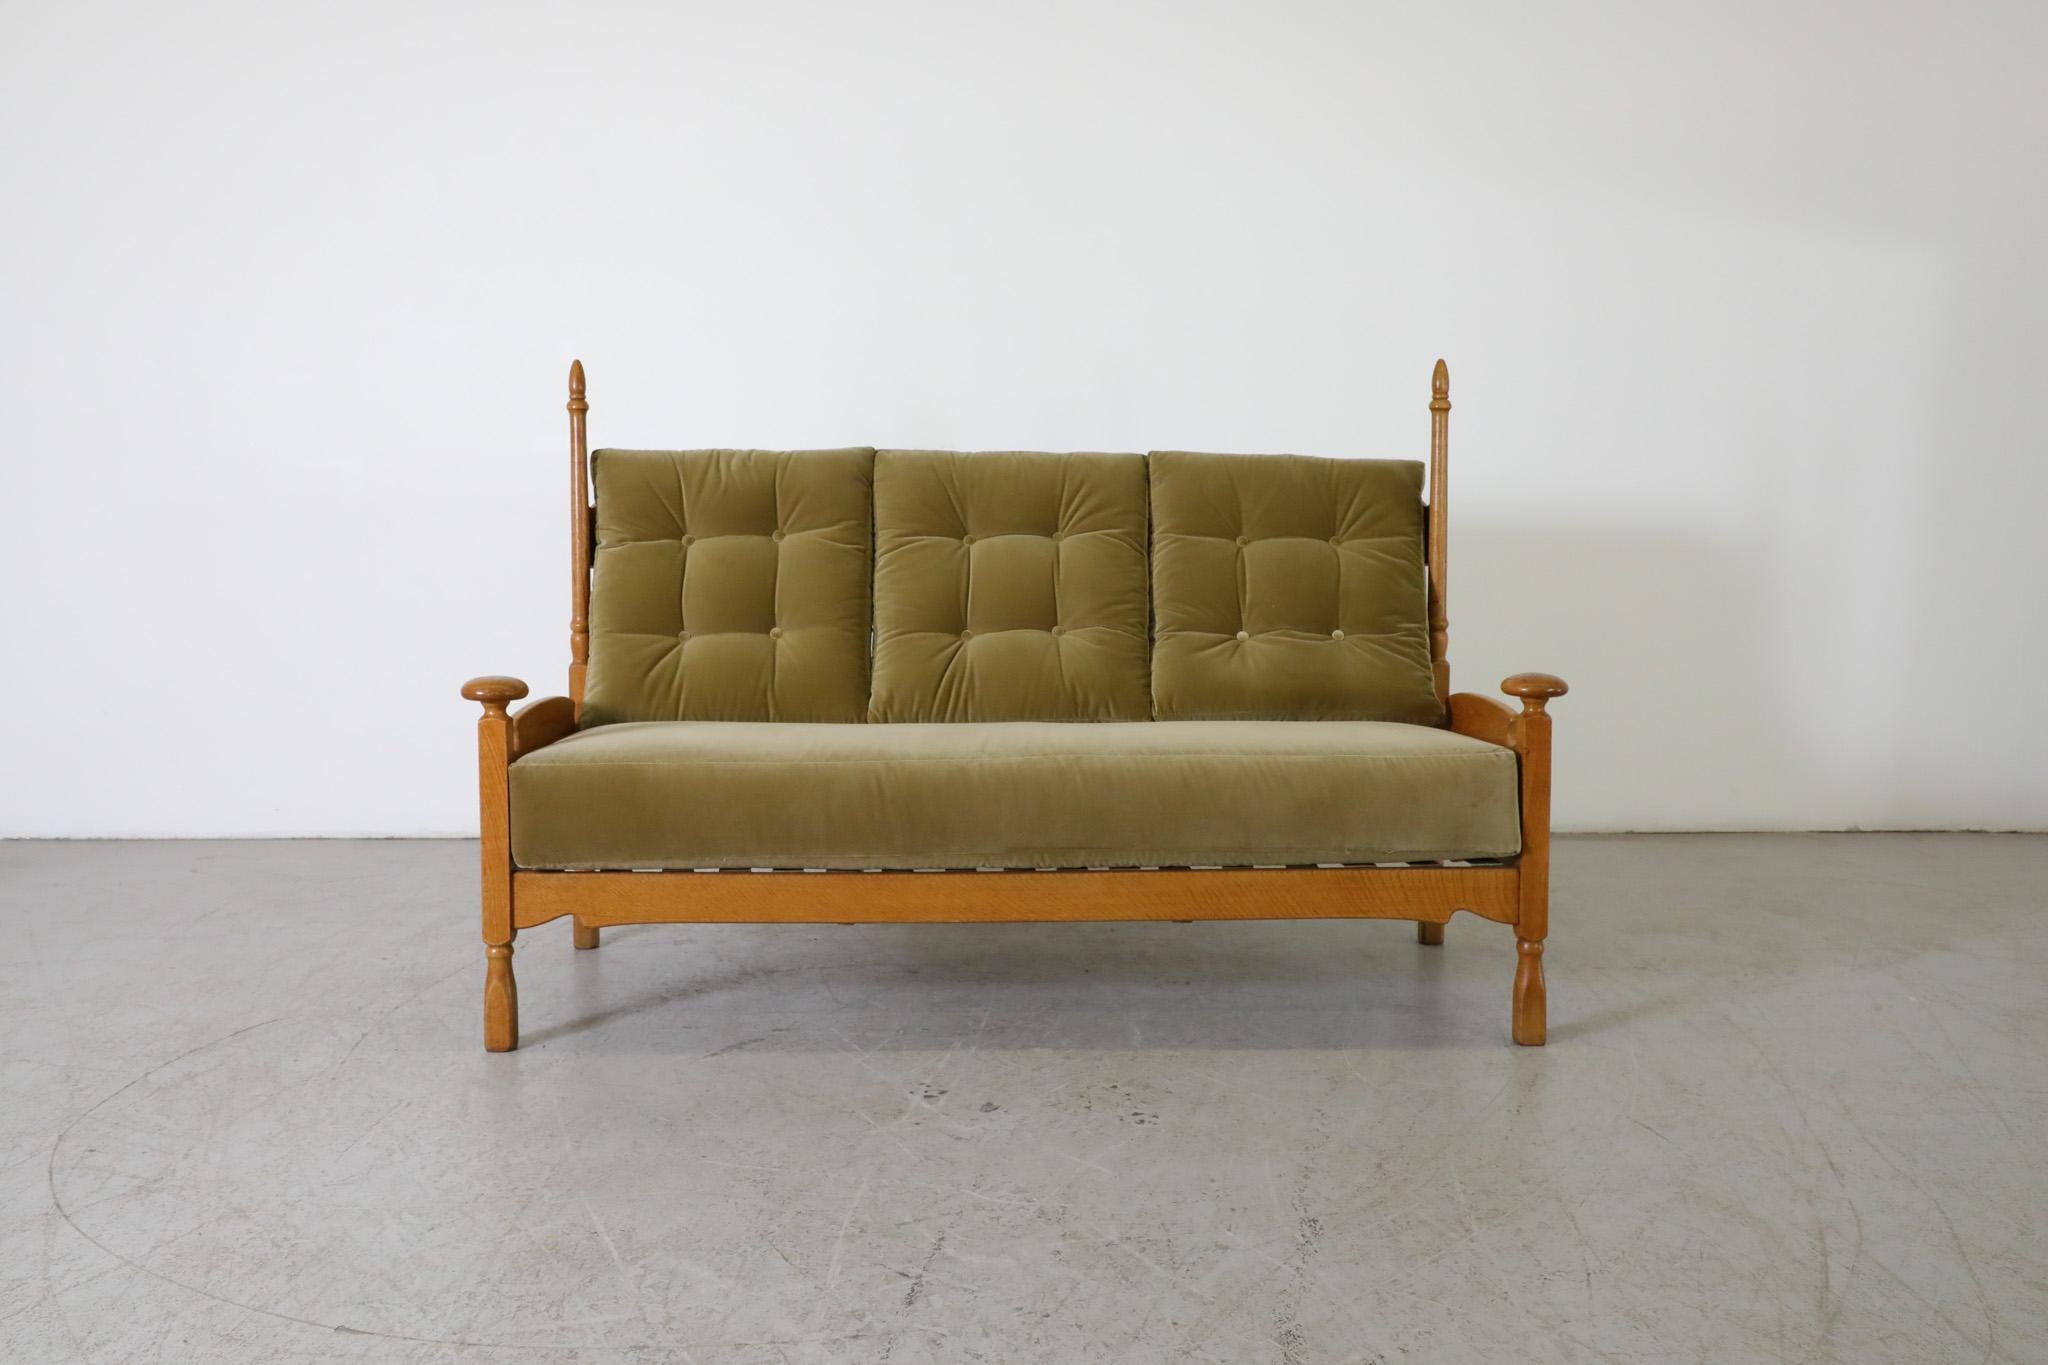 Rare and distinctively shaped oak sofa with large rounded finials at the front and high horn-shaped rods at the back. Very little information is available about this sofa but it is both visually appealing and extremely comfortable. The piece is